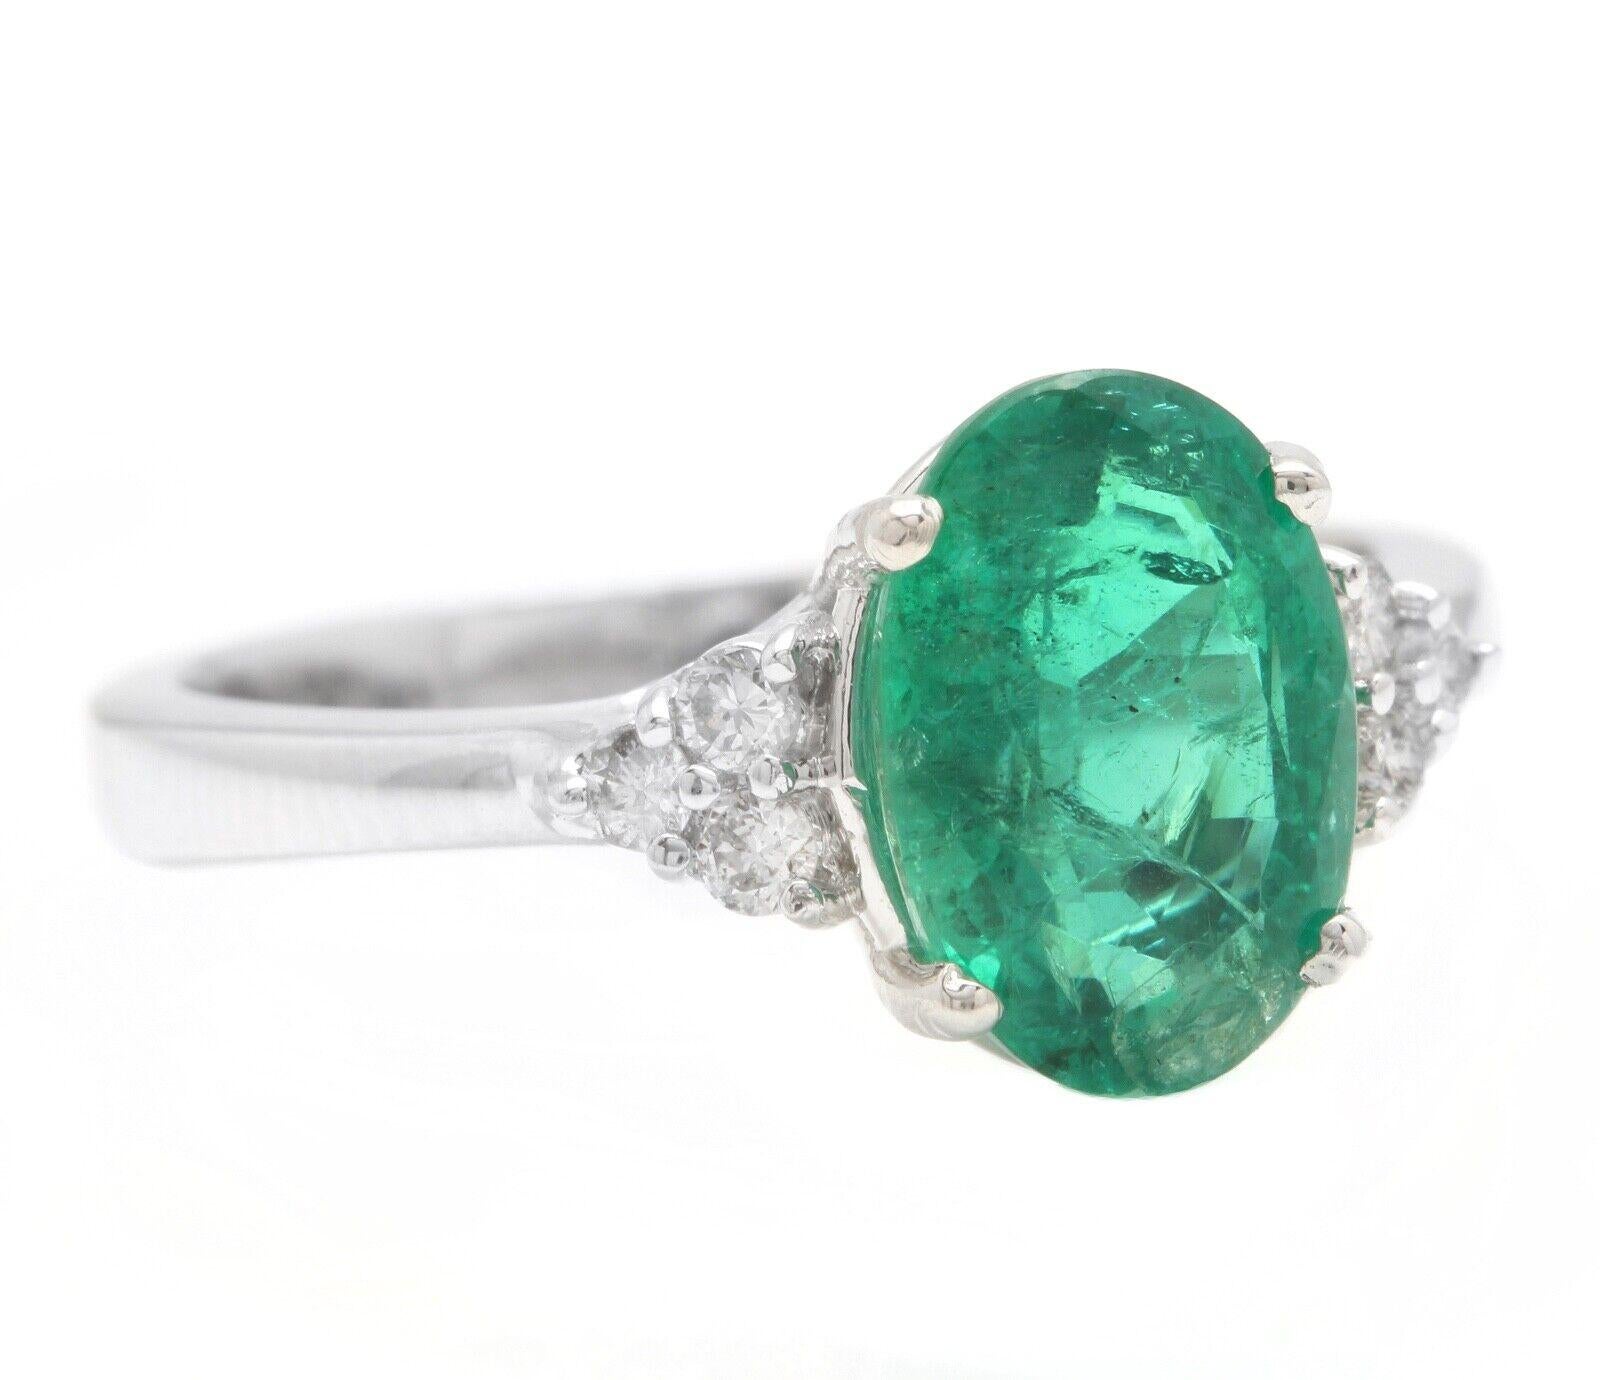 3.20 Carats Natural Emerald and Diamond 14K Solid White Gold Ring

Suggested Replacement Value: $5,200.00

Total Natural Green Emerald Weight is: Approx. 3.00 Carats (transparent)

Emerald Treatment: Oiling  

Emerald Measures: 10.85 x